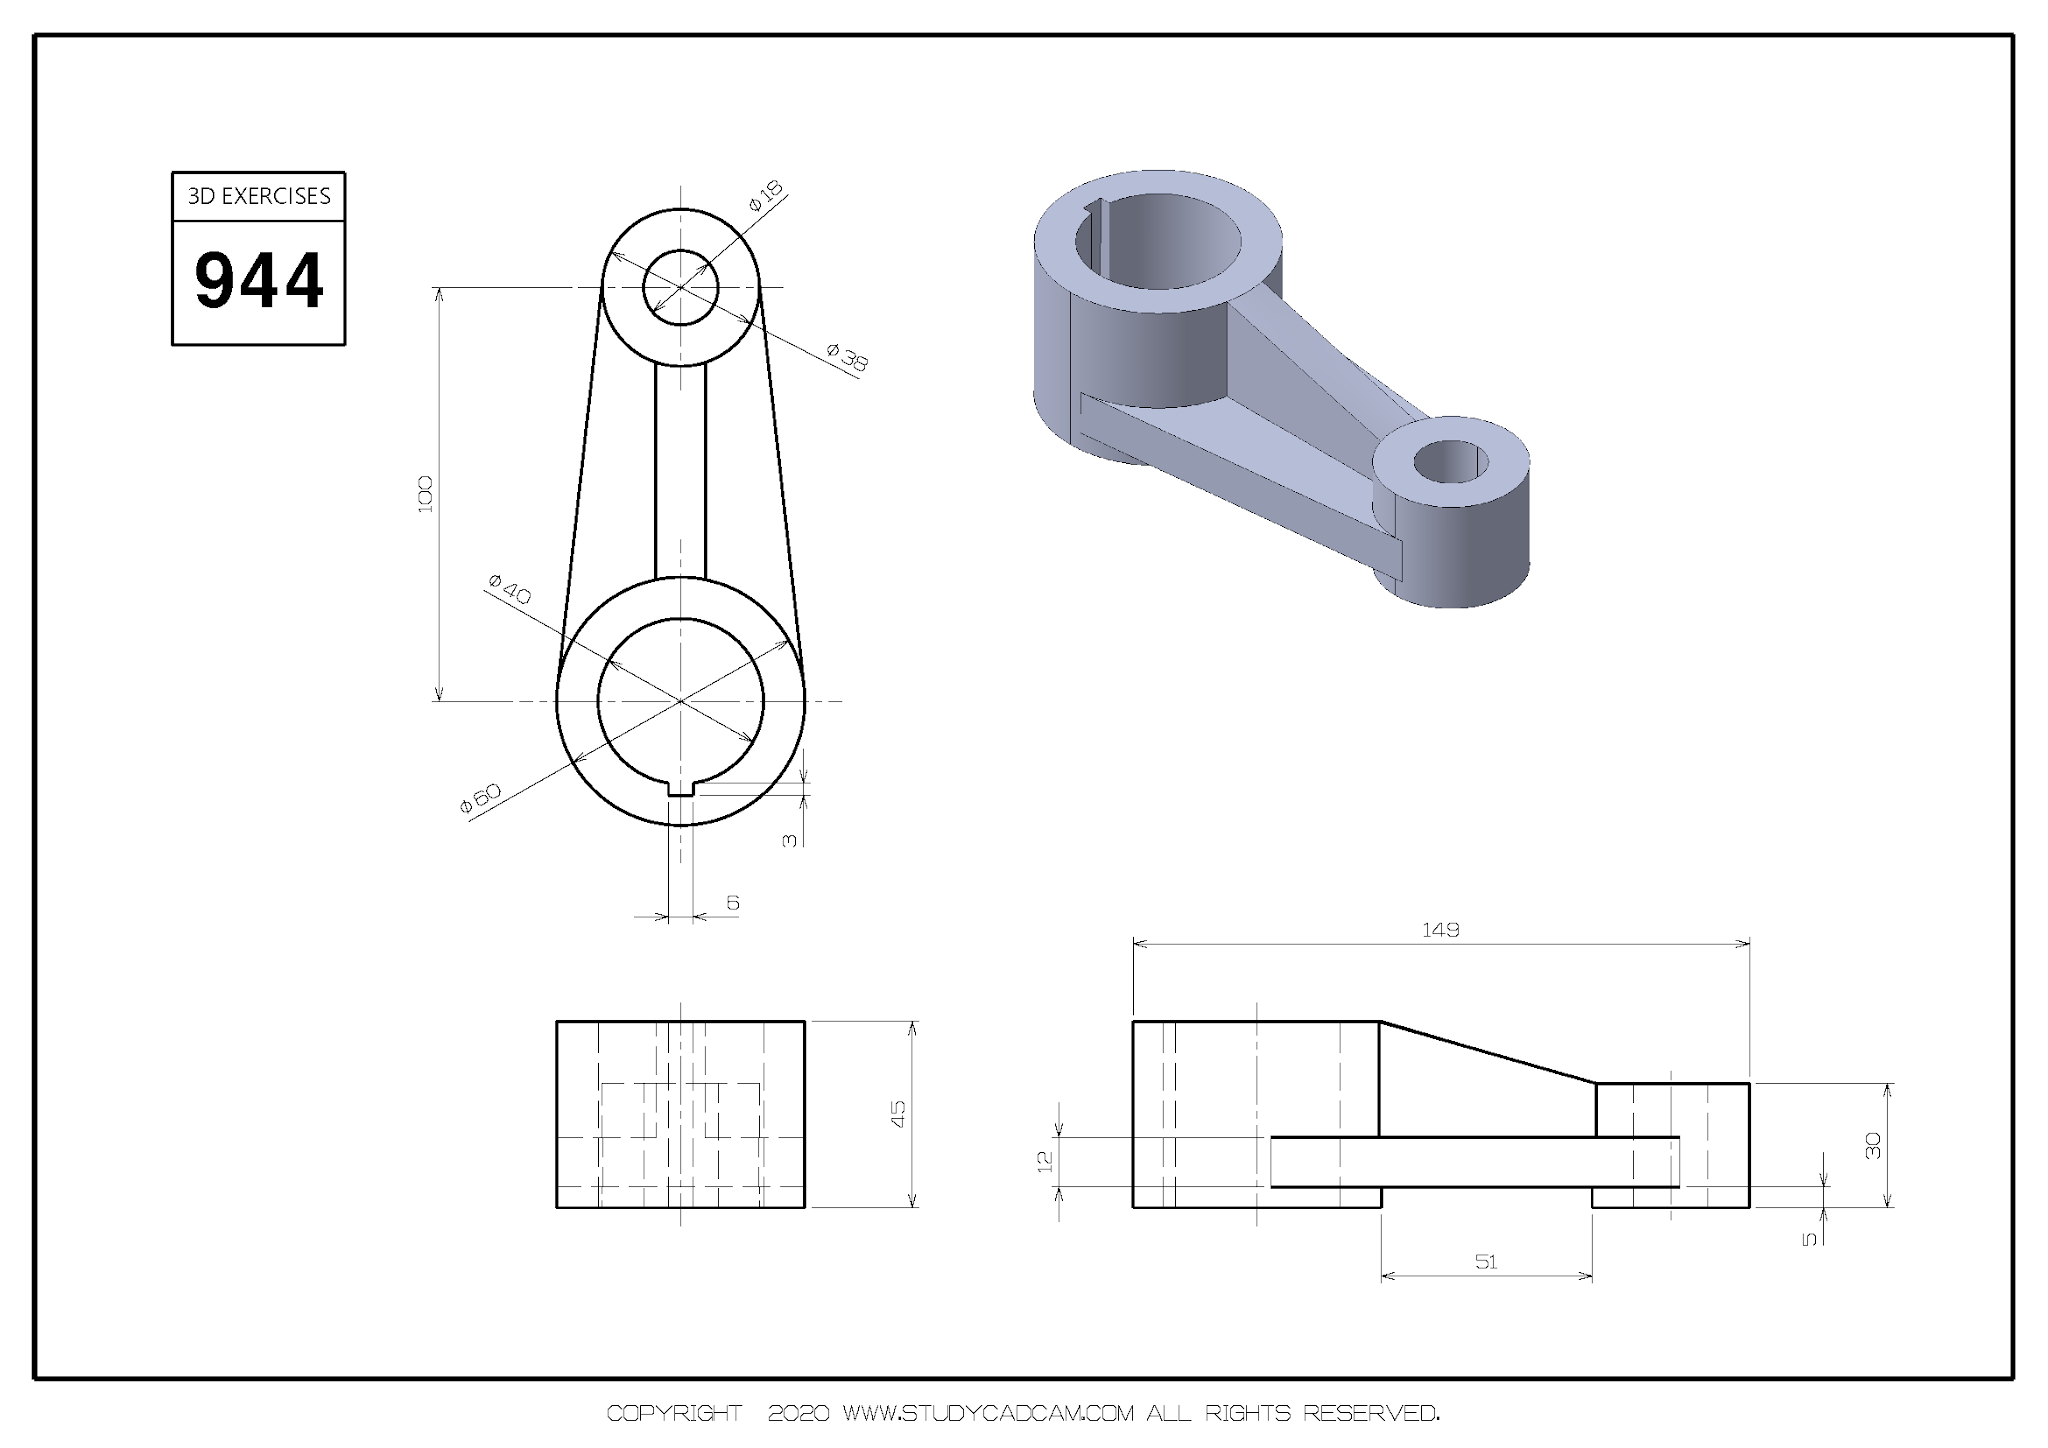 3d Cad Practice Drawings Ebpofe